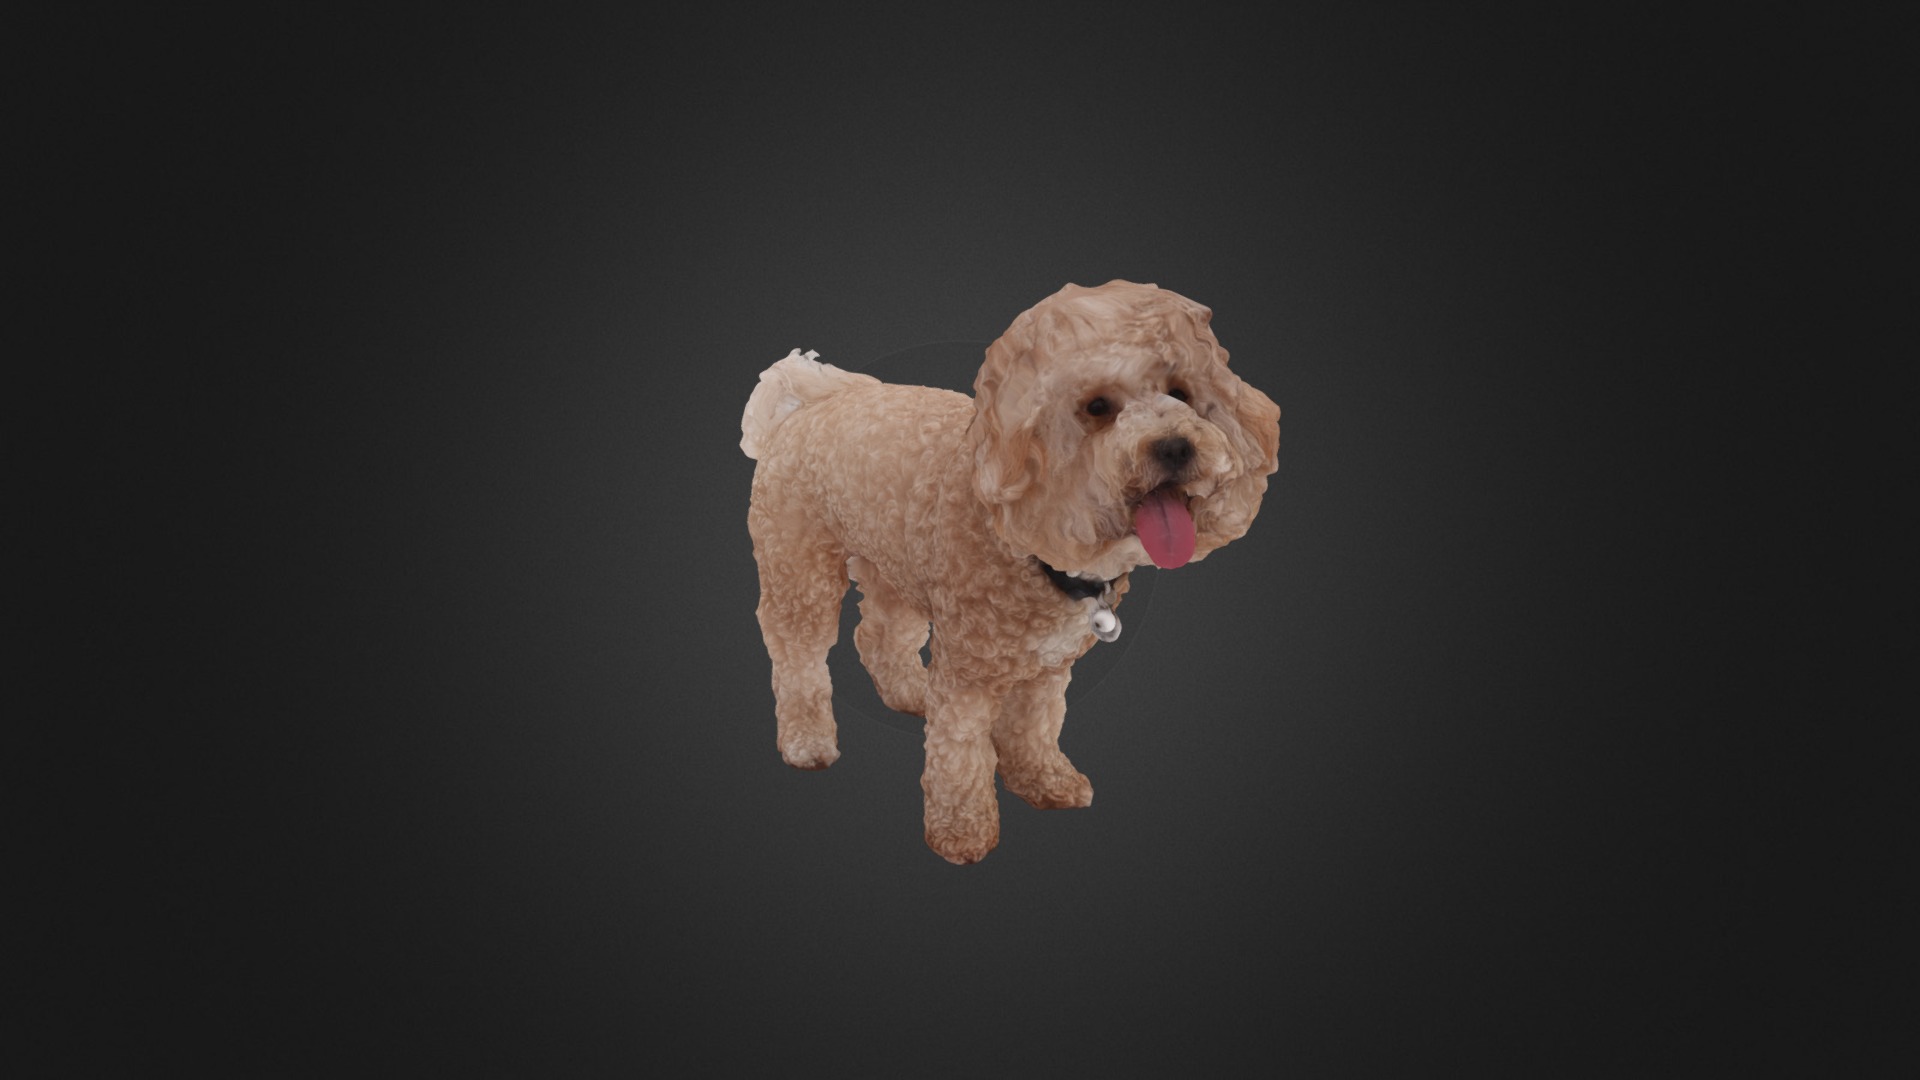 3D model Scanned Poodle Dog - This is a 3D model of the Scanned Poodle Dog. The 3D model is about a dog running on a black background.